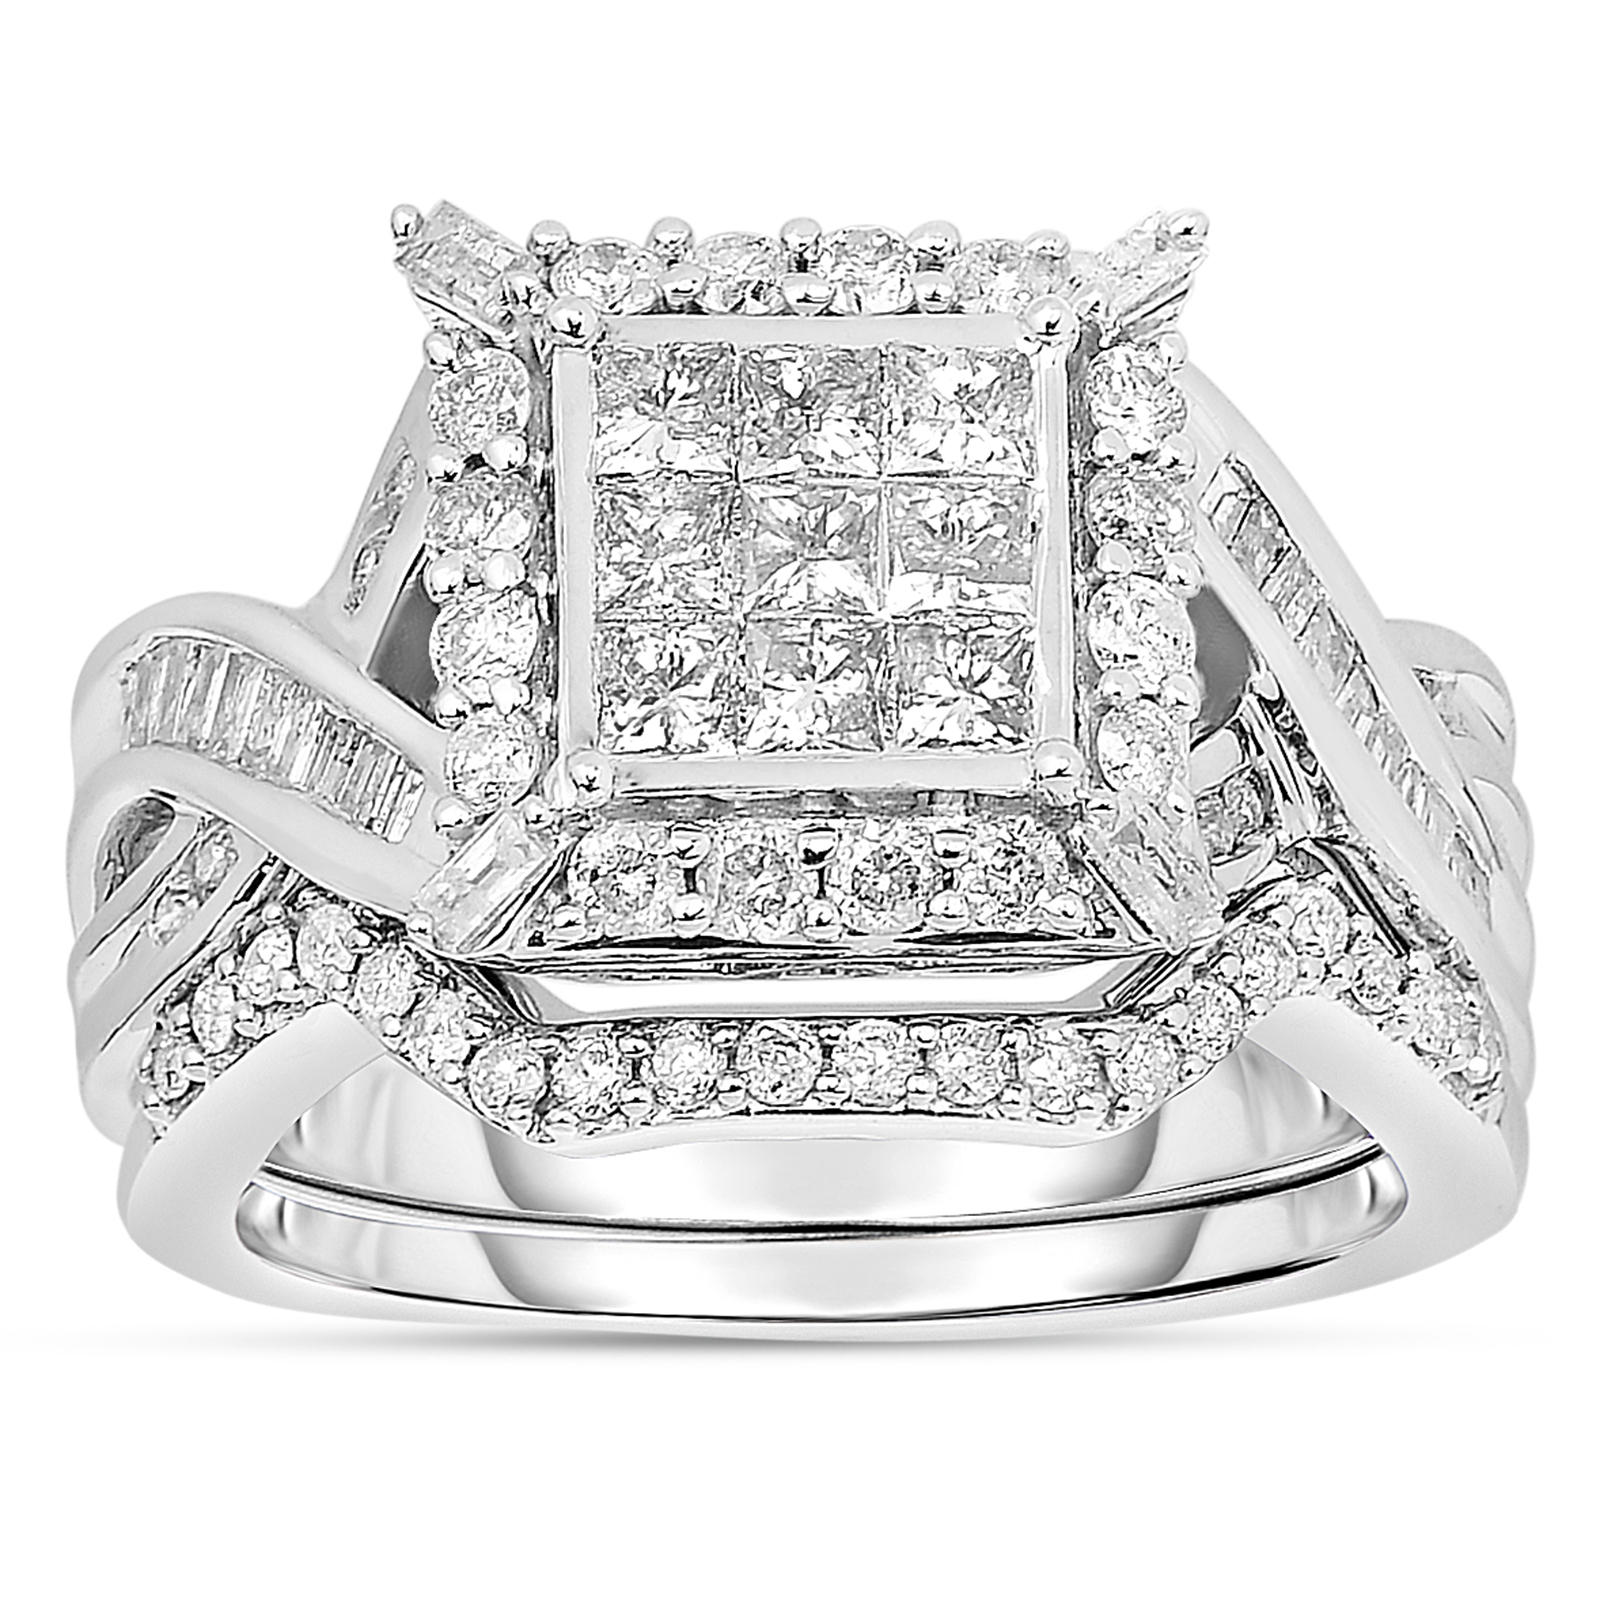 Infinitely Yours 10kt 1 1/2 cttw  Diamond Bridal Set - Size 7 Only